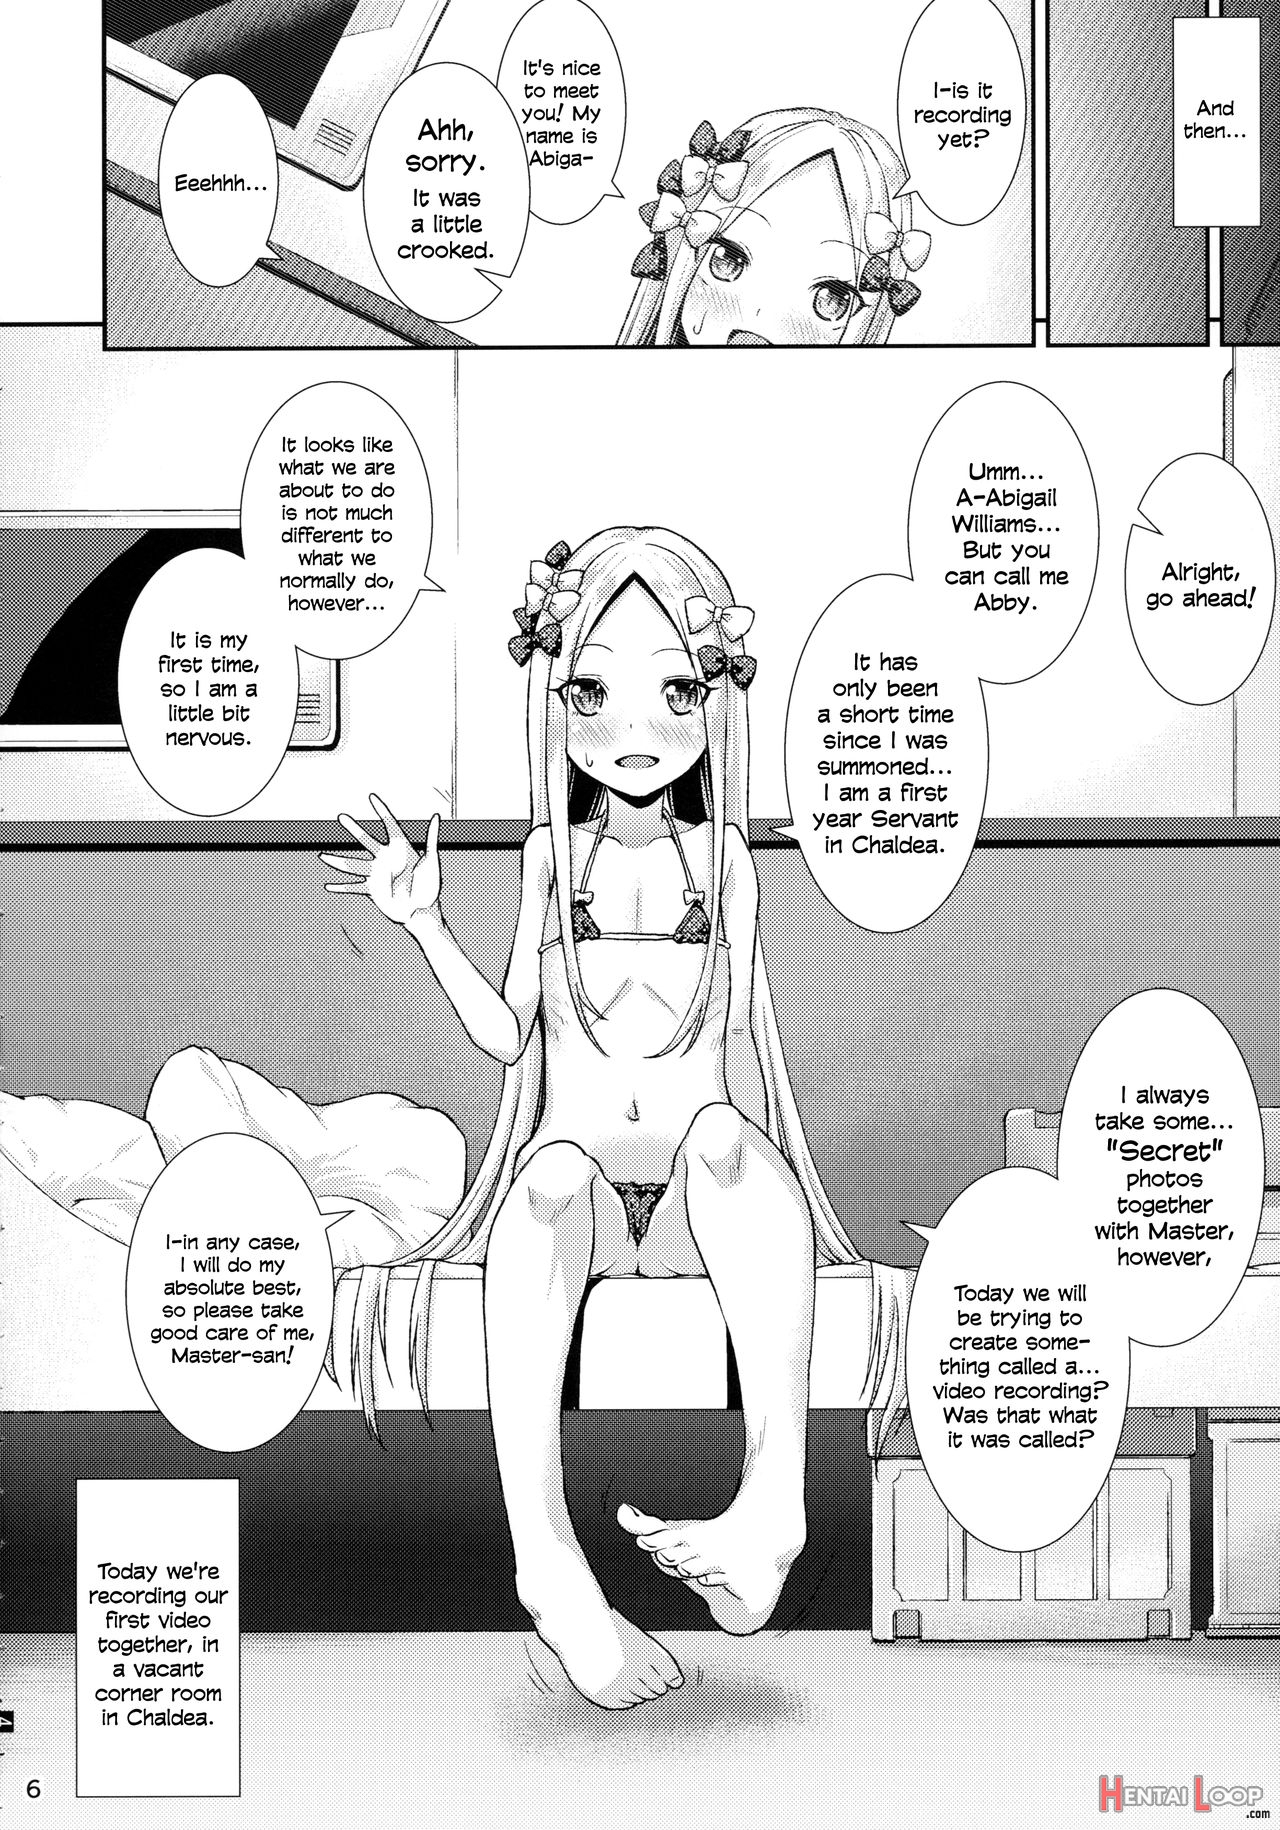 Page 4 of Abby And The Secret Homemade Sex Tape (by Yamazaki Kana) picture